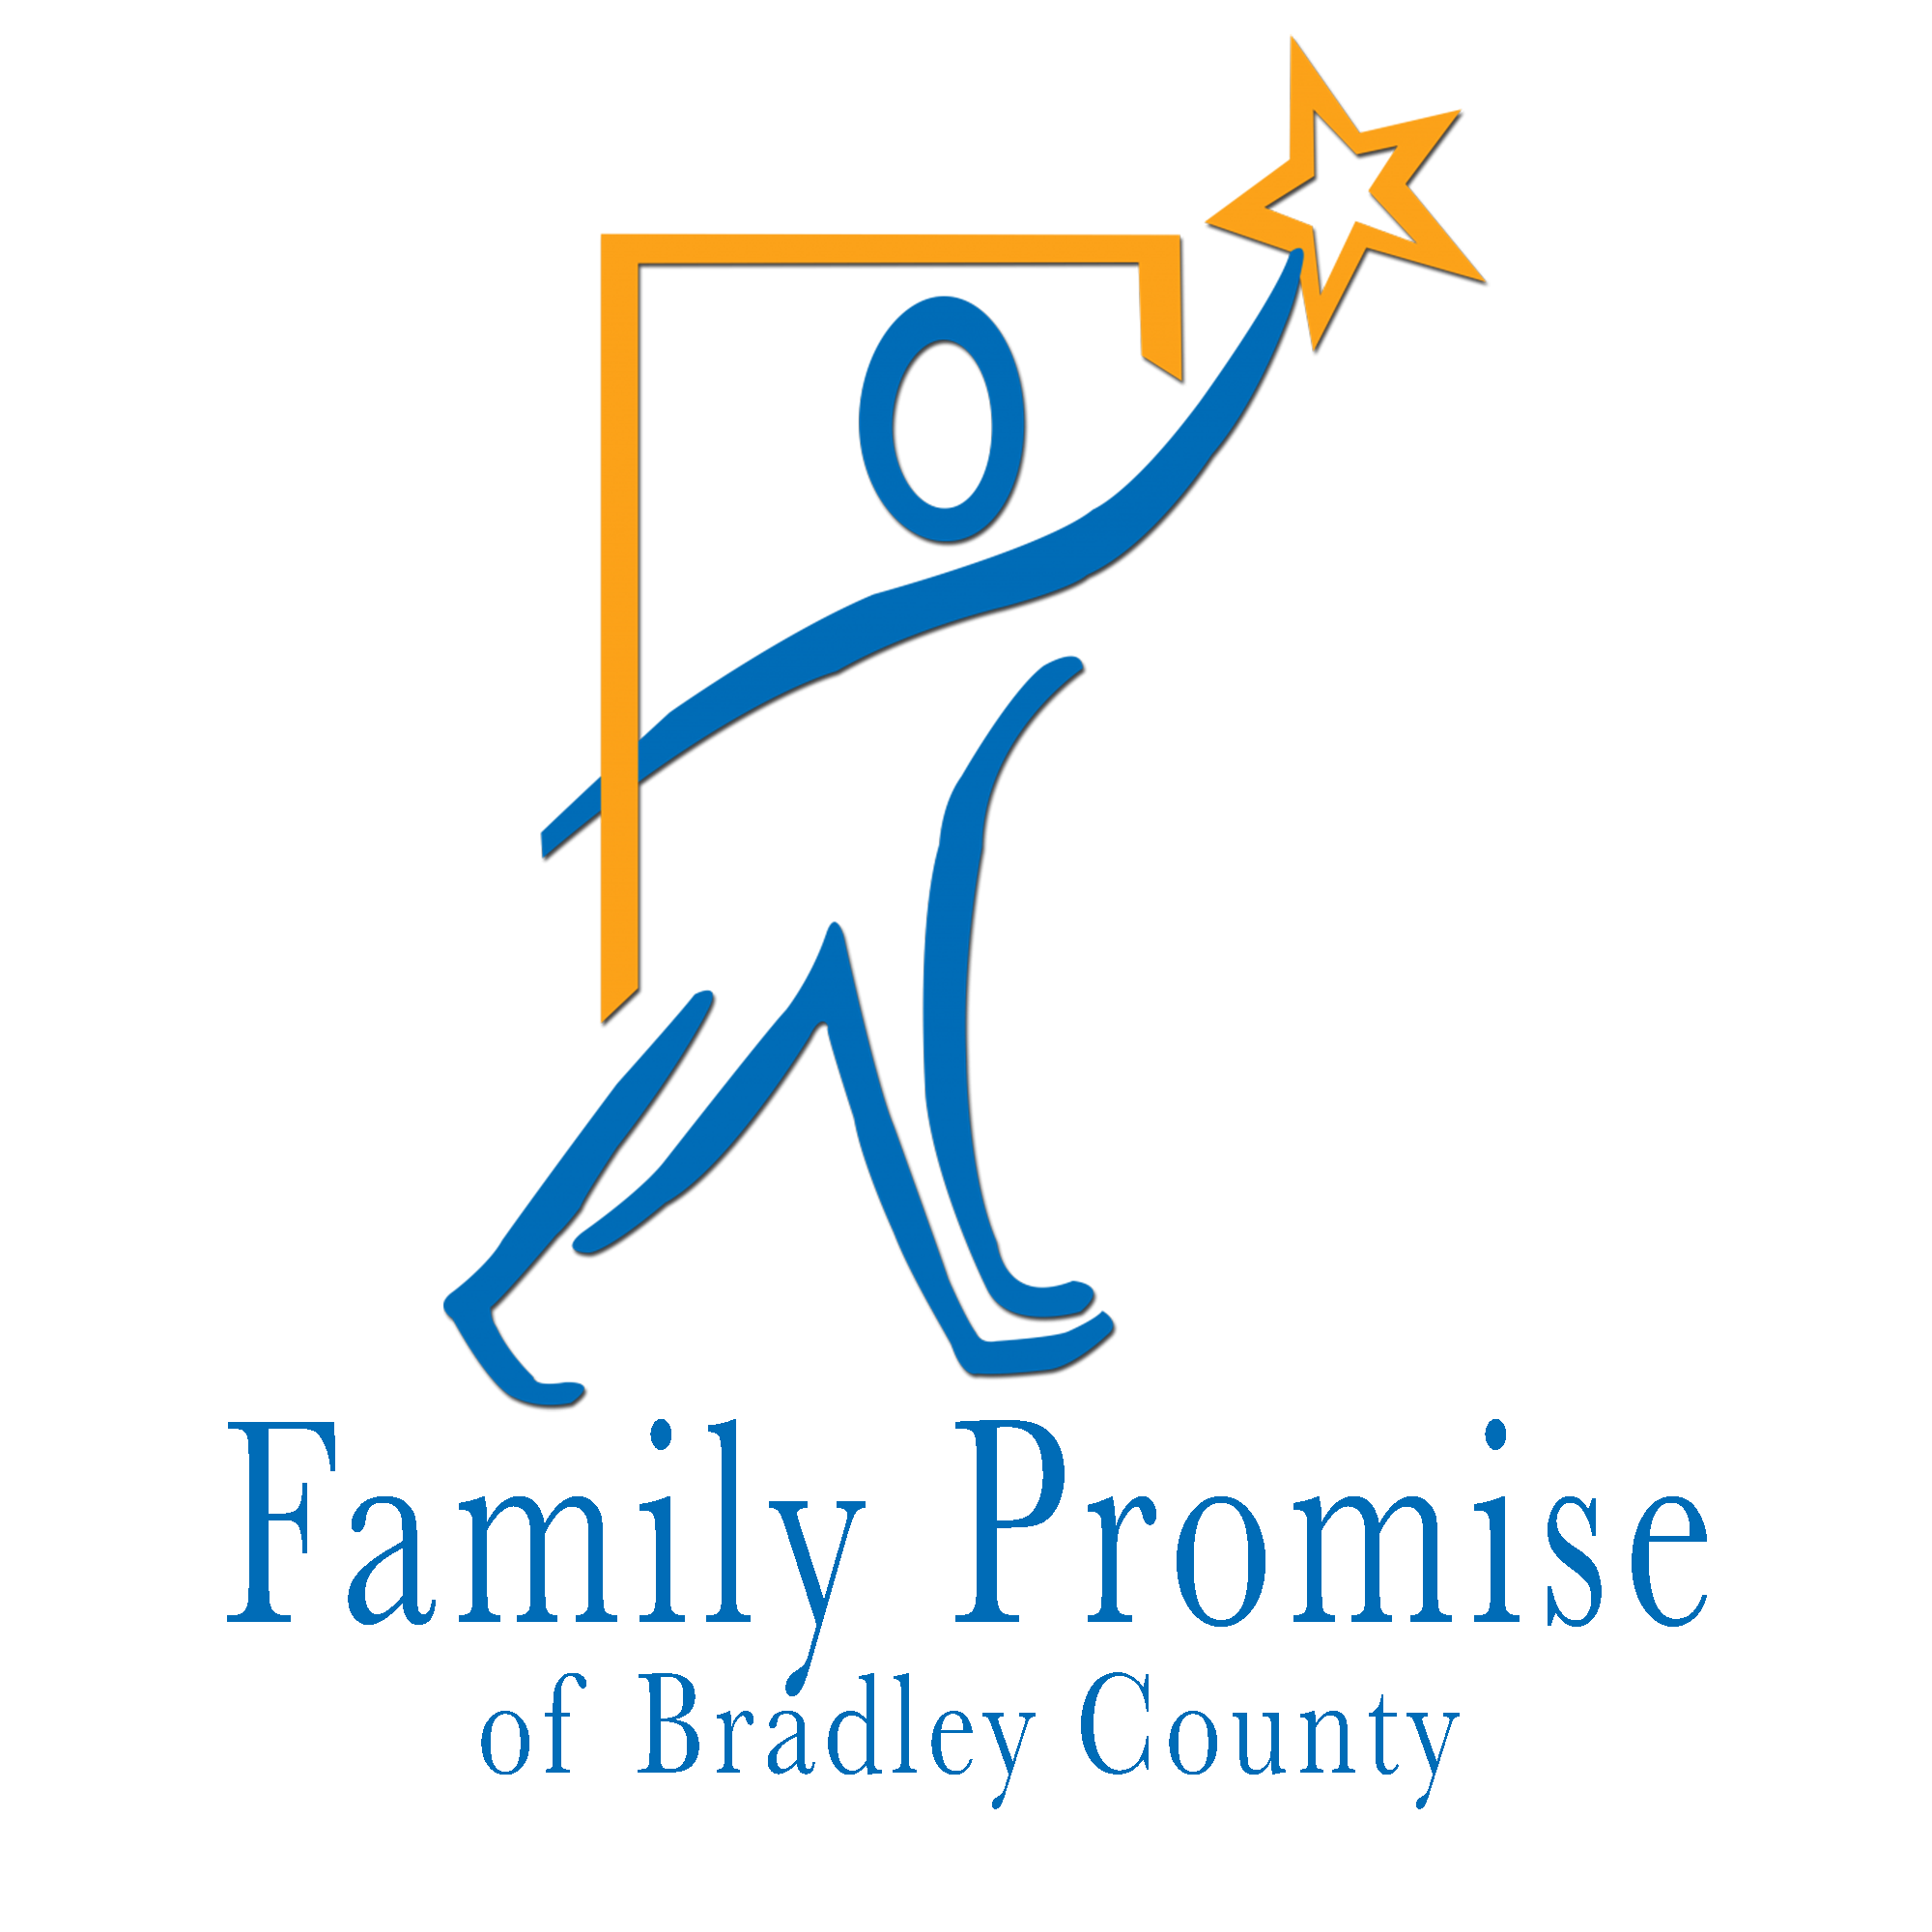 familypromise-572601.square.site